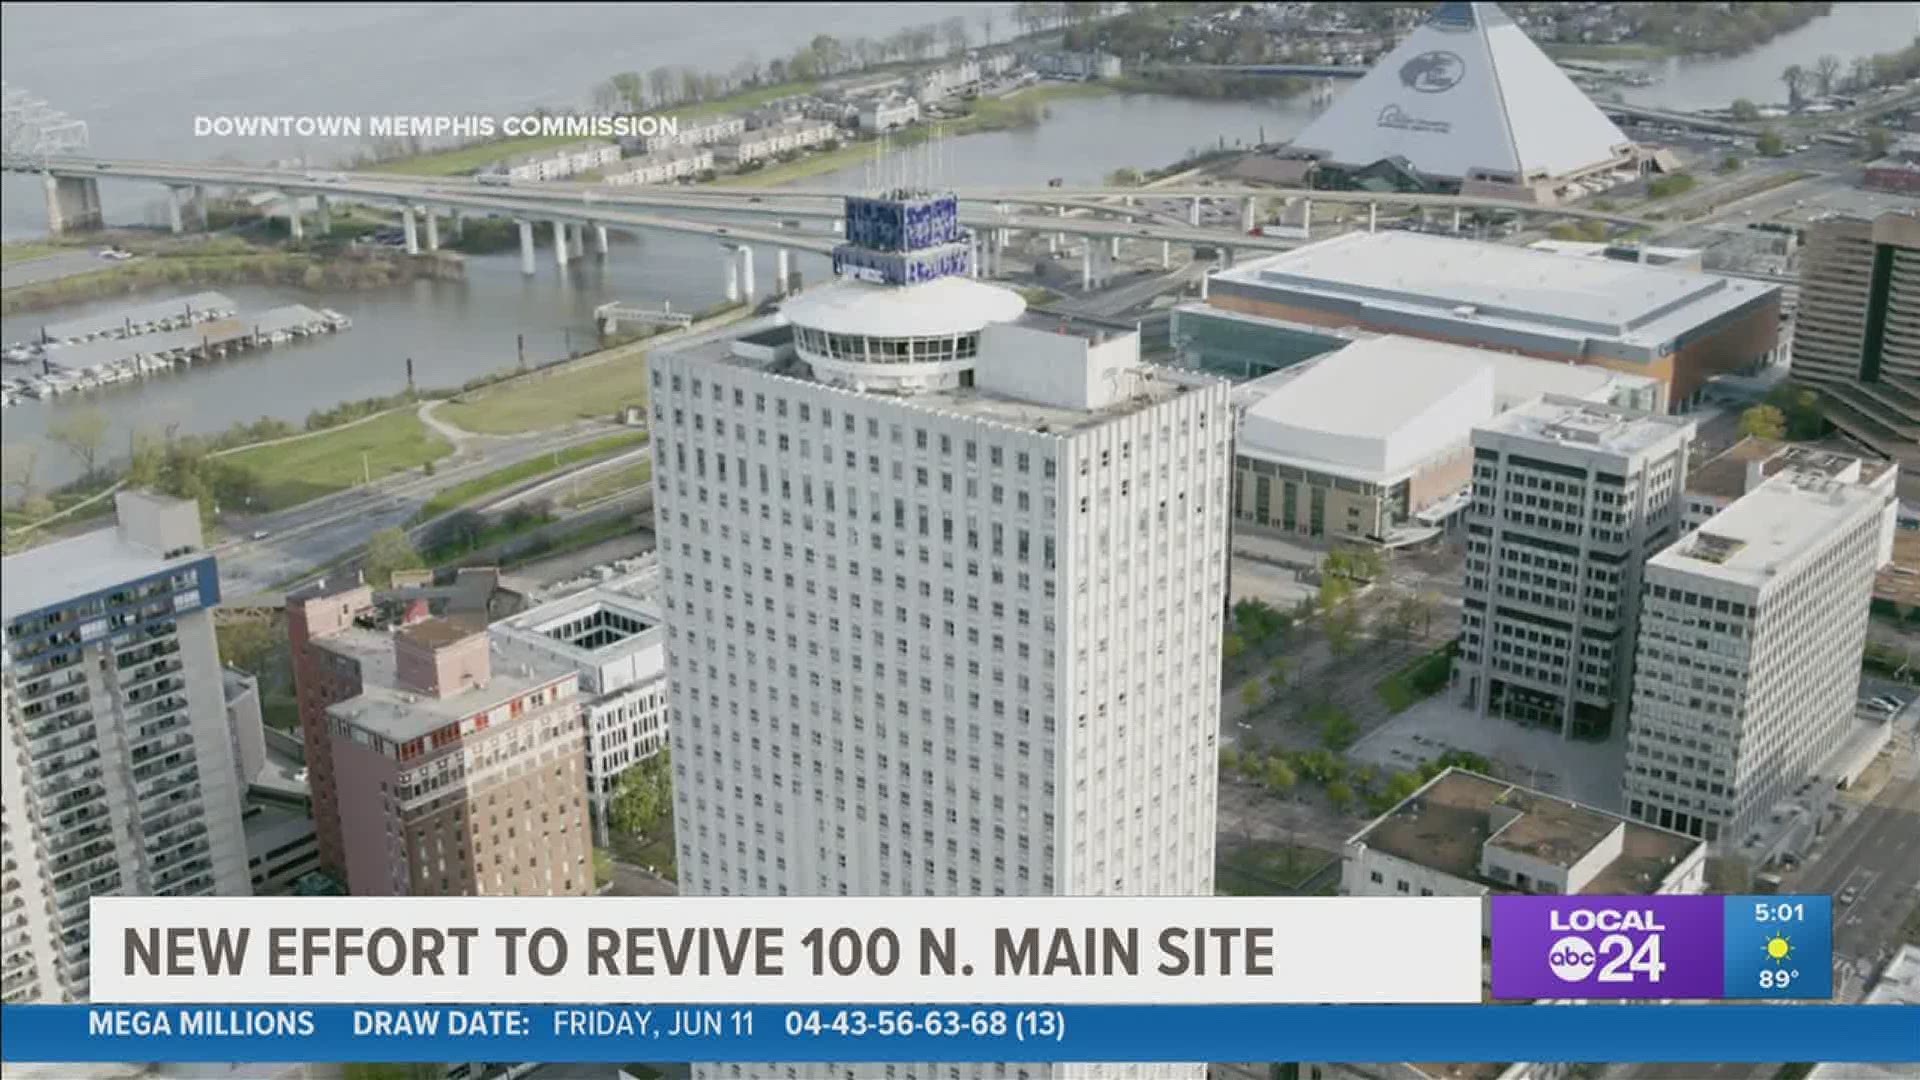 Developers asked to submit proposals to redevelop downtown's tallest building and 2-acre site.